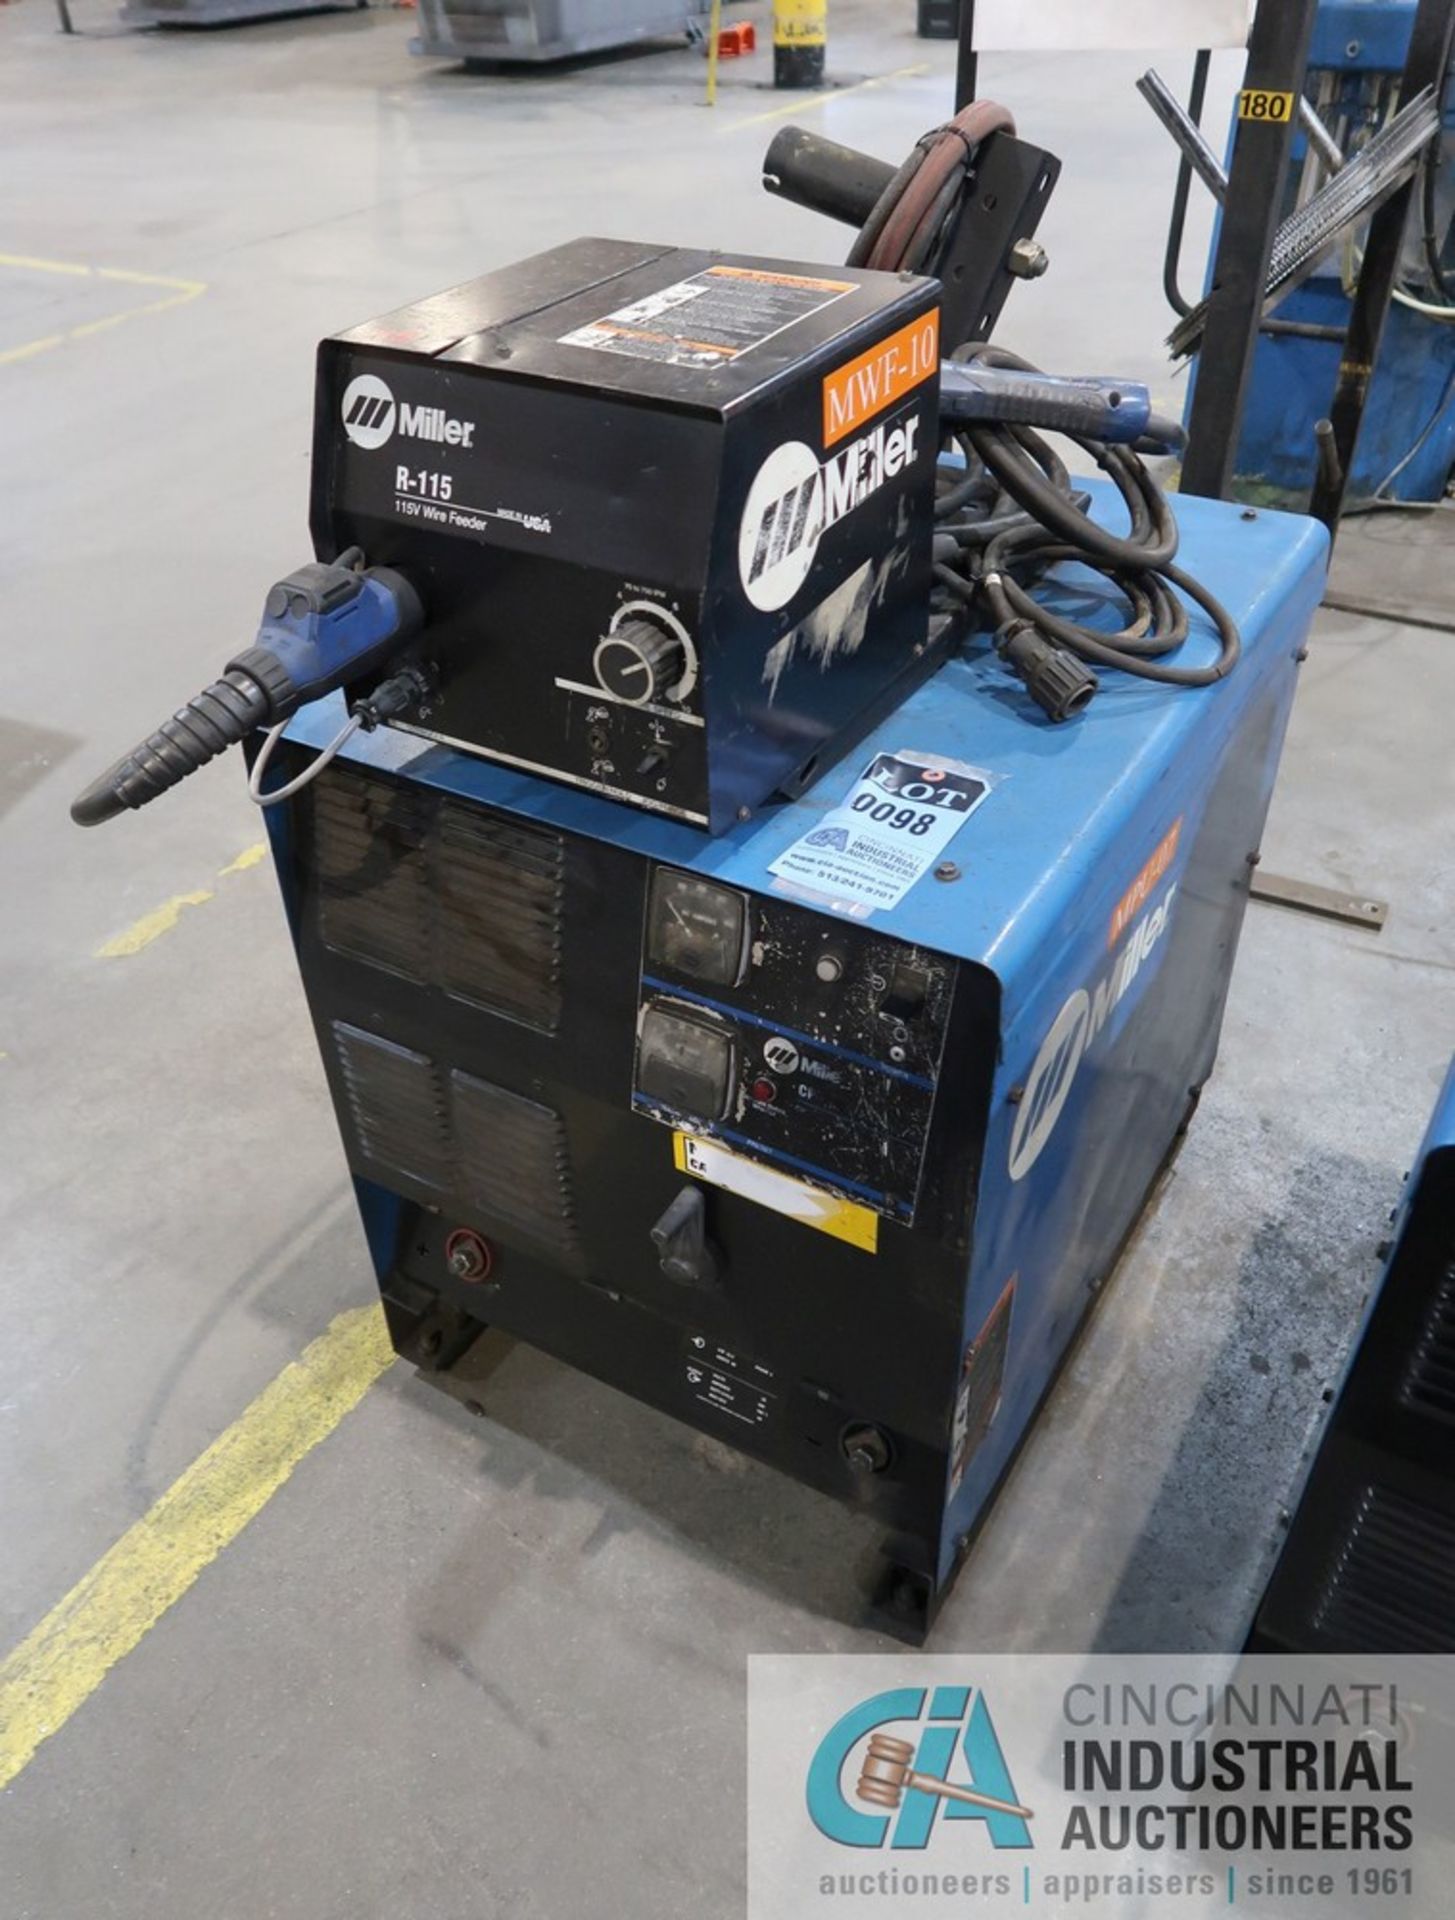 300 AMP MILLER CP-302 CV-DC WELDING POWER SOURCE; S/N LC485301, WITH MILLER R-115 115 VOLT WIRE